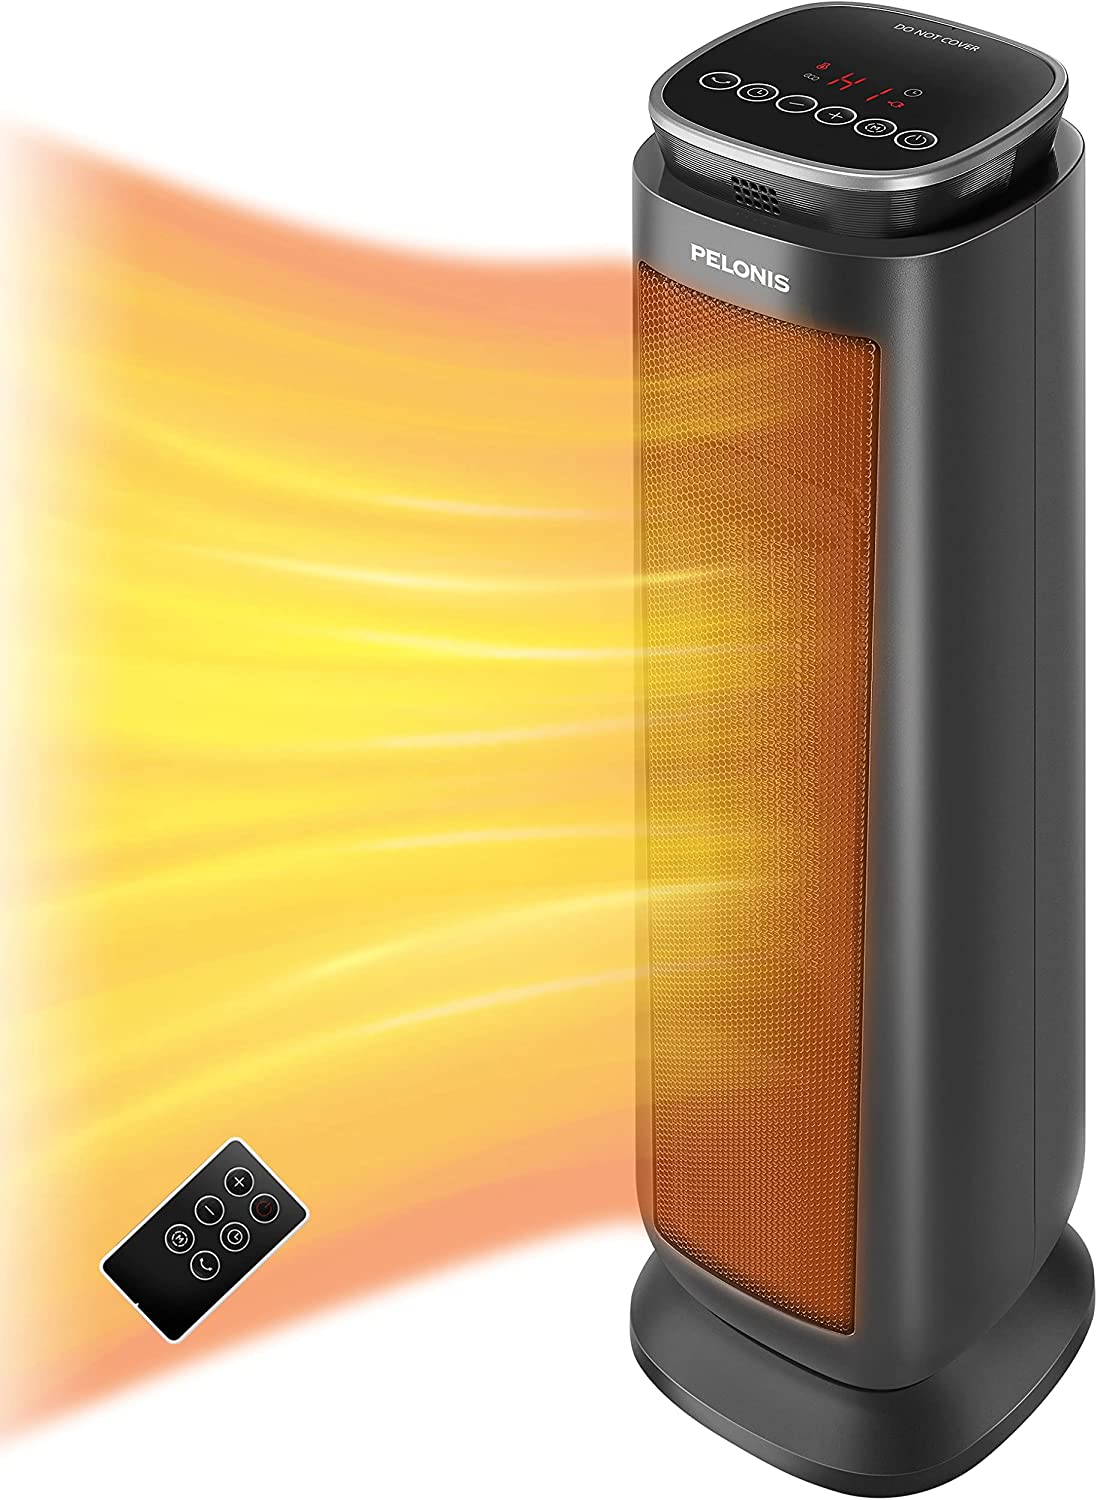 PELONIS PTH15A4BGB Ceramic Tower 1500W Indoor Space Heater with Oscillation, Remote Control, Programmable Thermostat & 8H Timer, ECO Mode